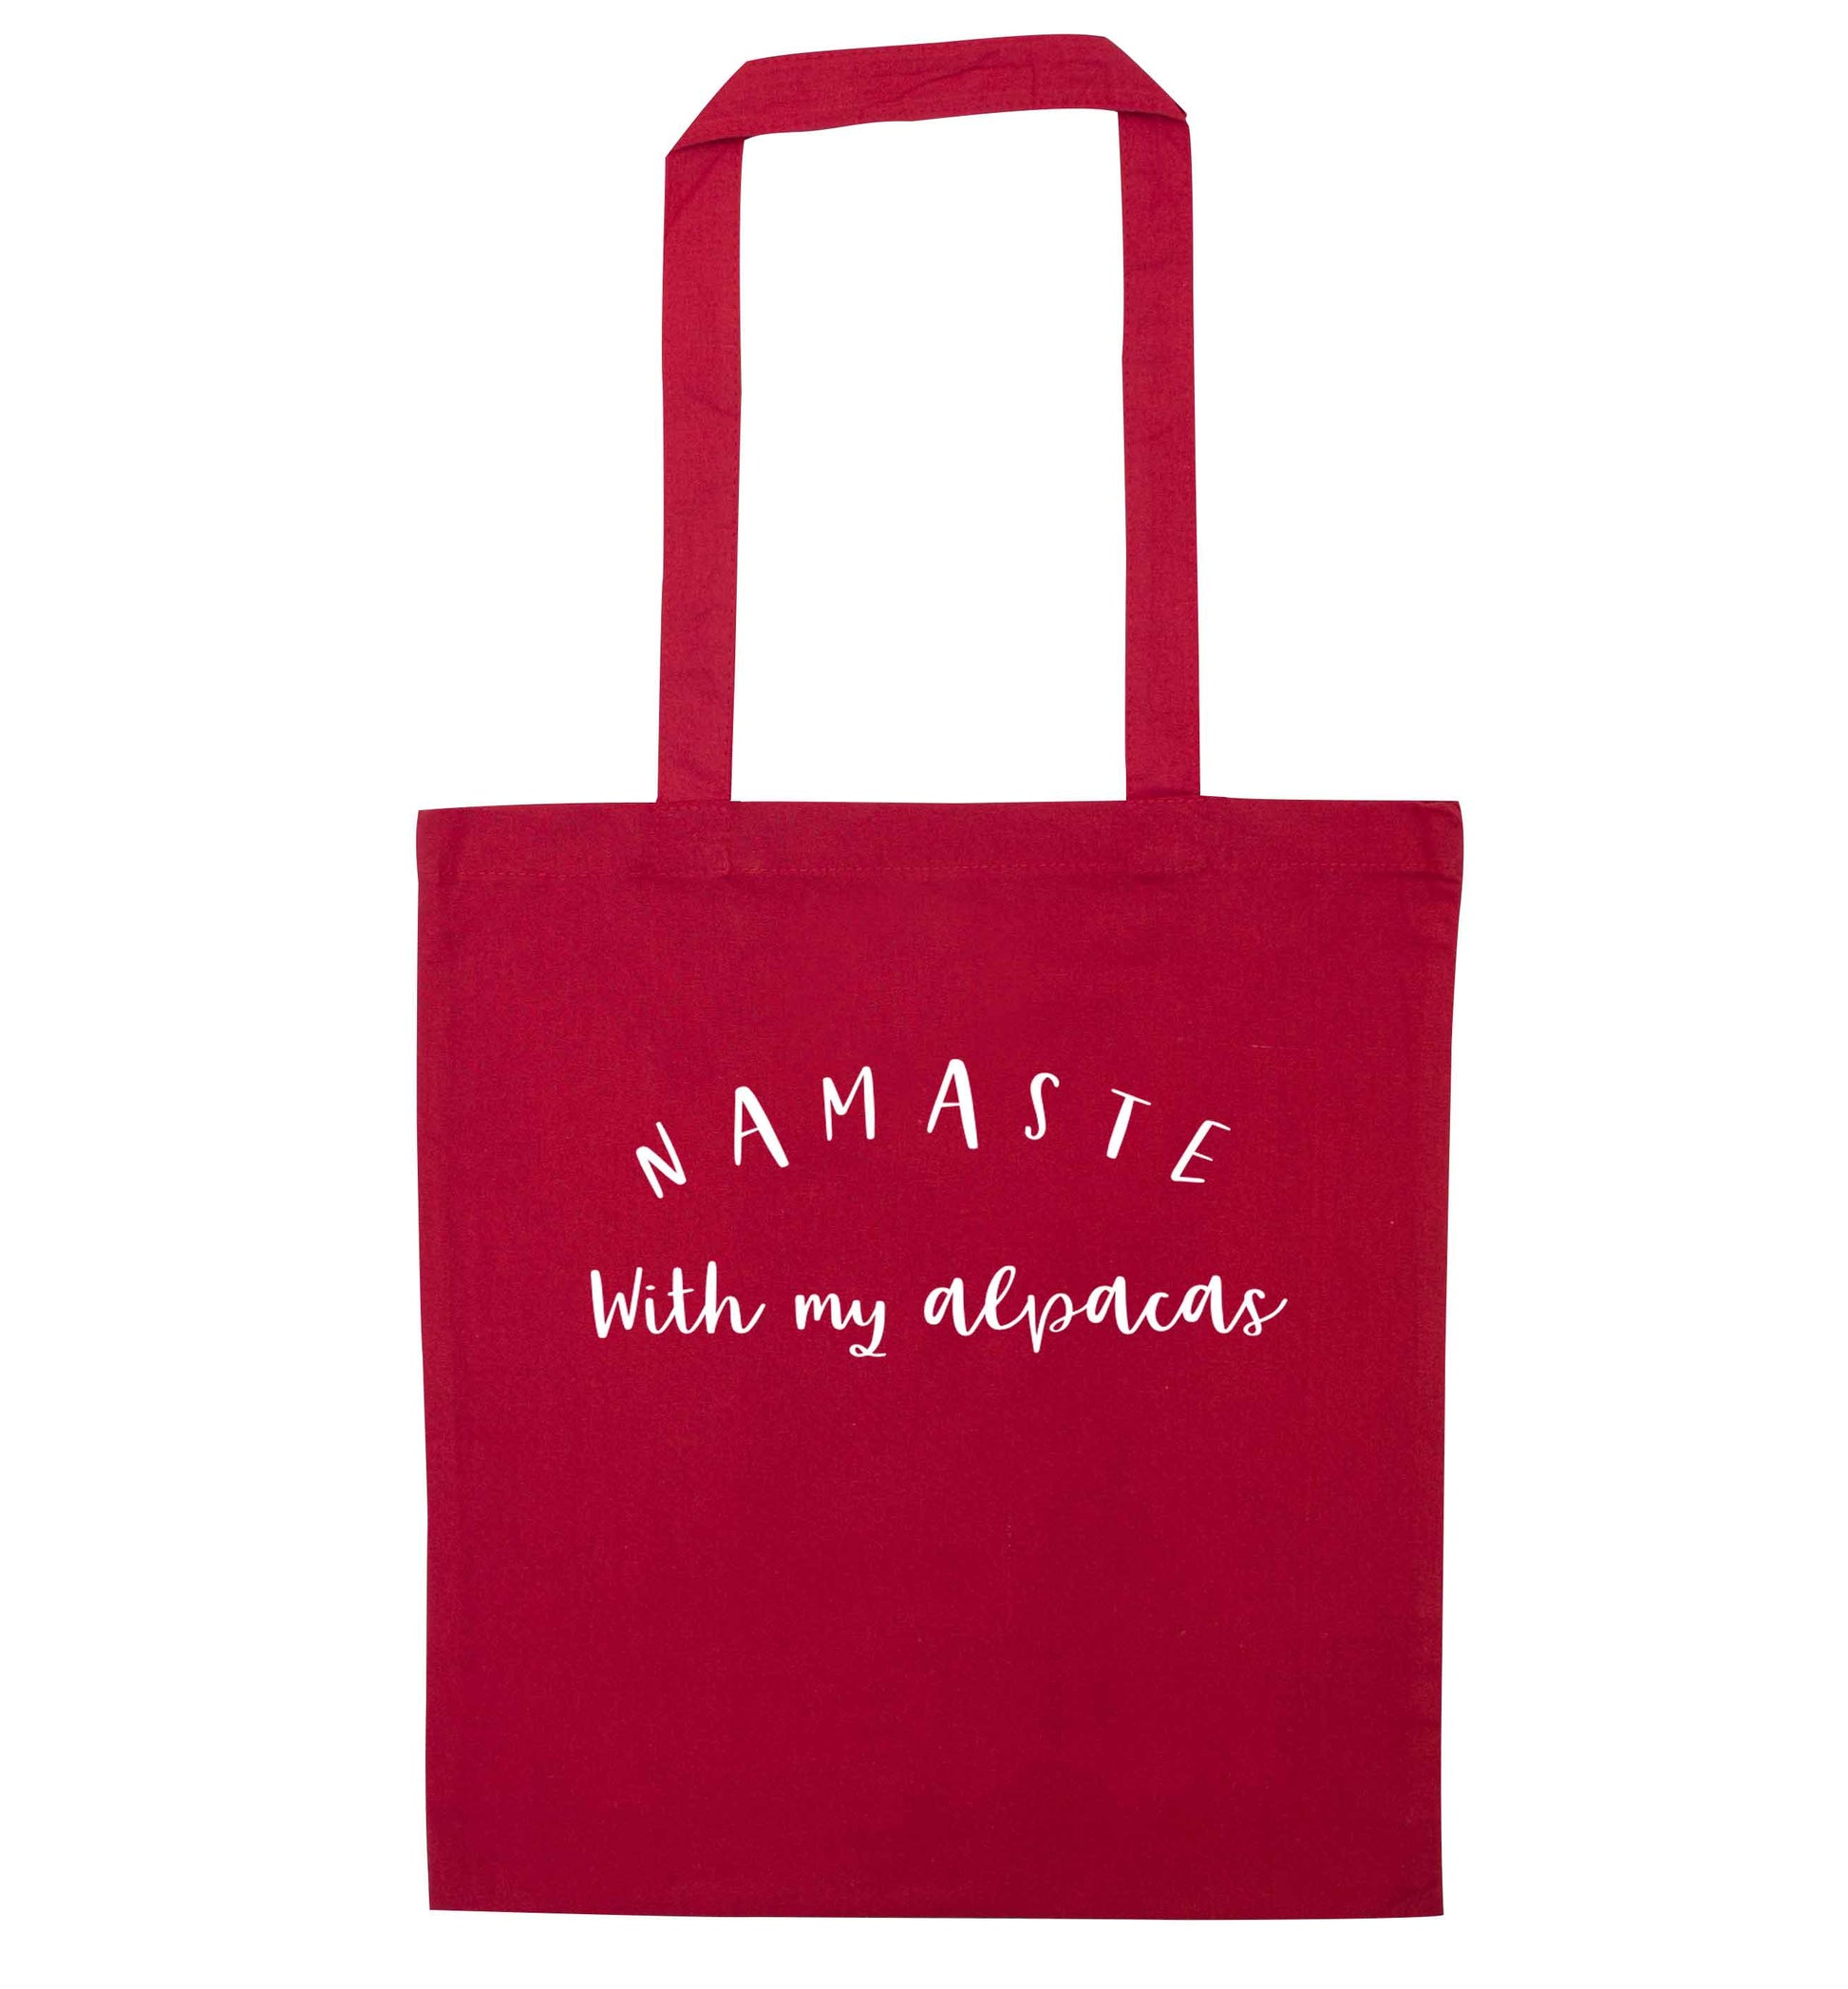 Namaste with my alpacas red tote bag